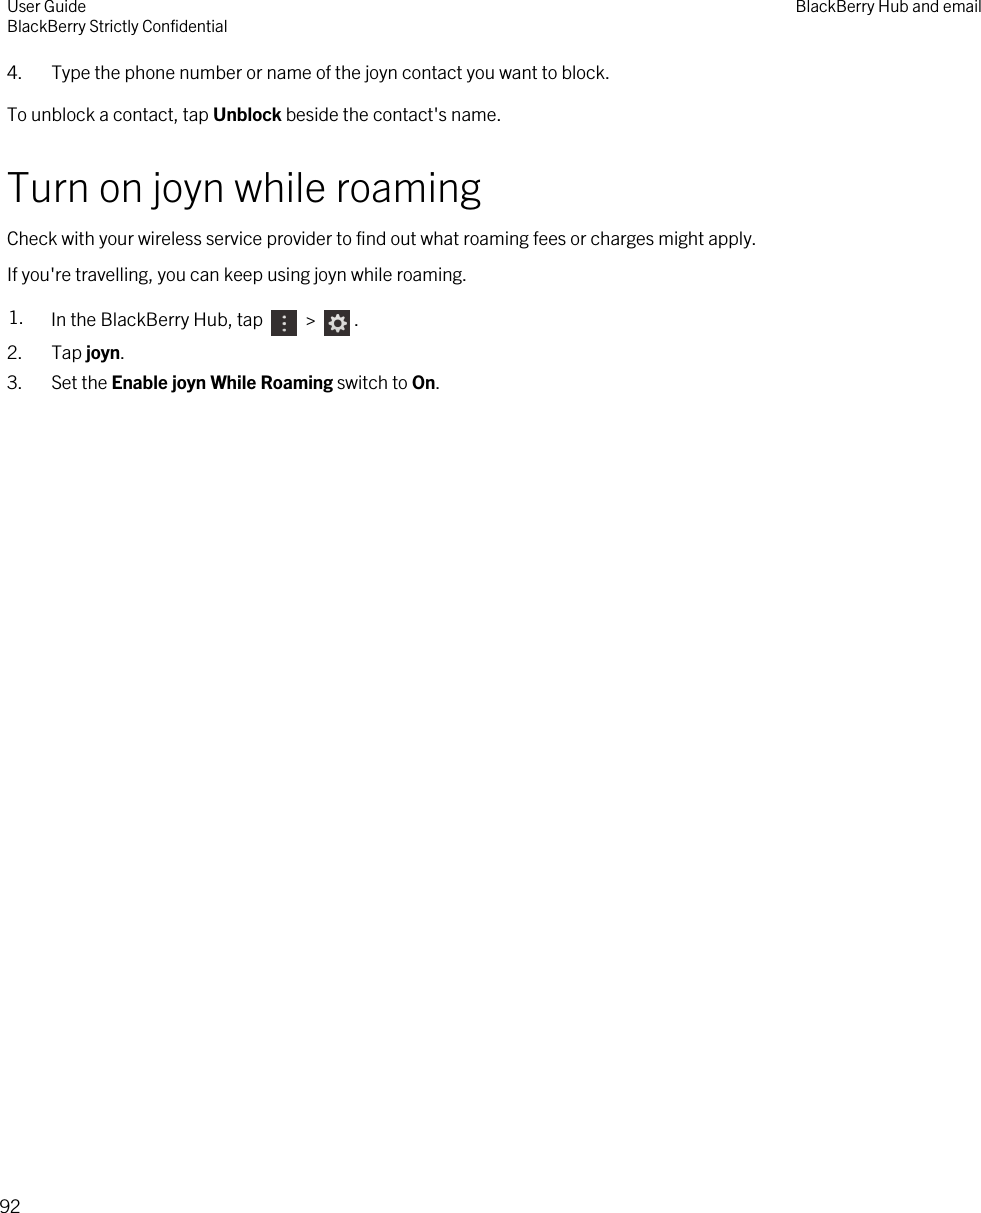 4. Type the phone number or name of the joyn contact you want to block.To unblock a contact, tap Unblock beside the contact&apos;s name.Turn on joyn while roamingCheck with your wireless service provider to find out what roaming fees or charges might apply.If you&apos;re travelling, you can keep using joyn while roaming.1. In the BlackBerry Hub, tap   &gt;  .2. Tap joyn.3. Set the Enable joyn While Roaming switch to On.User GuideBlackBerry Strictly Confidential BlackBerry Hub and email92